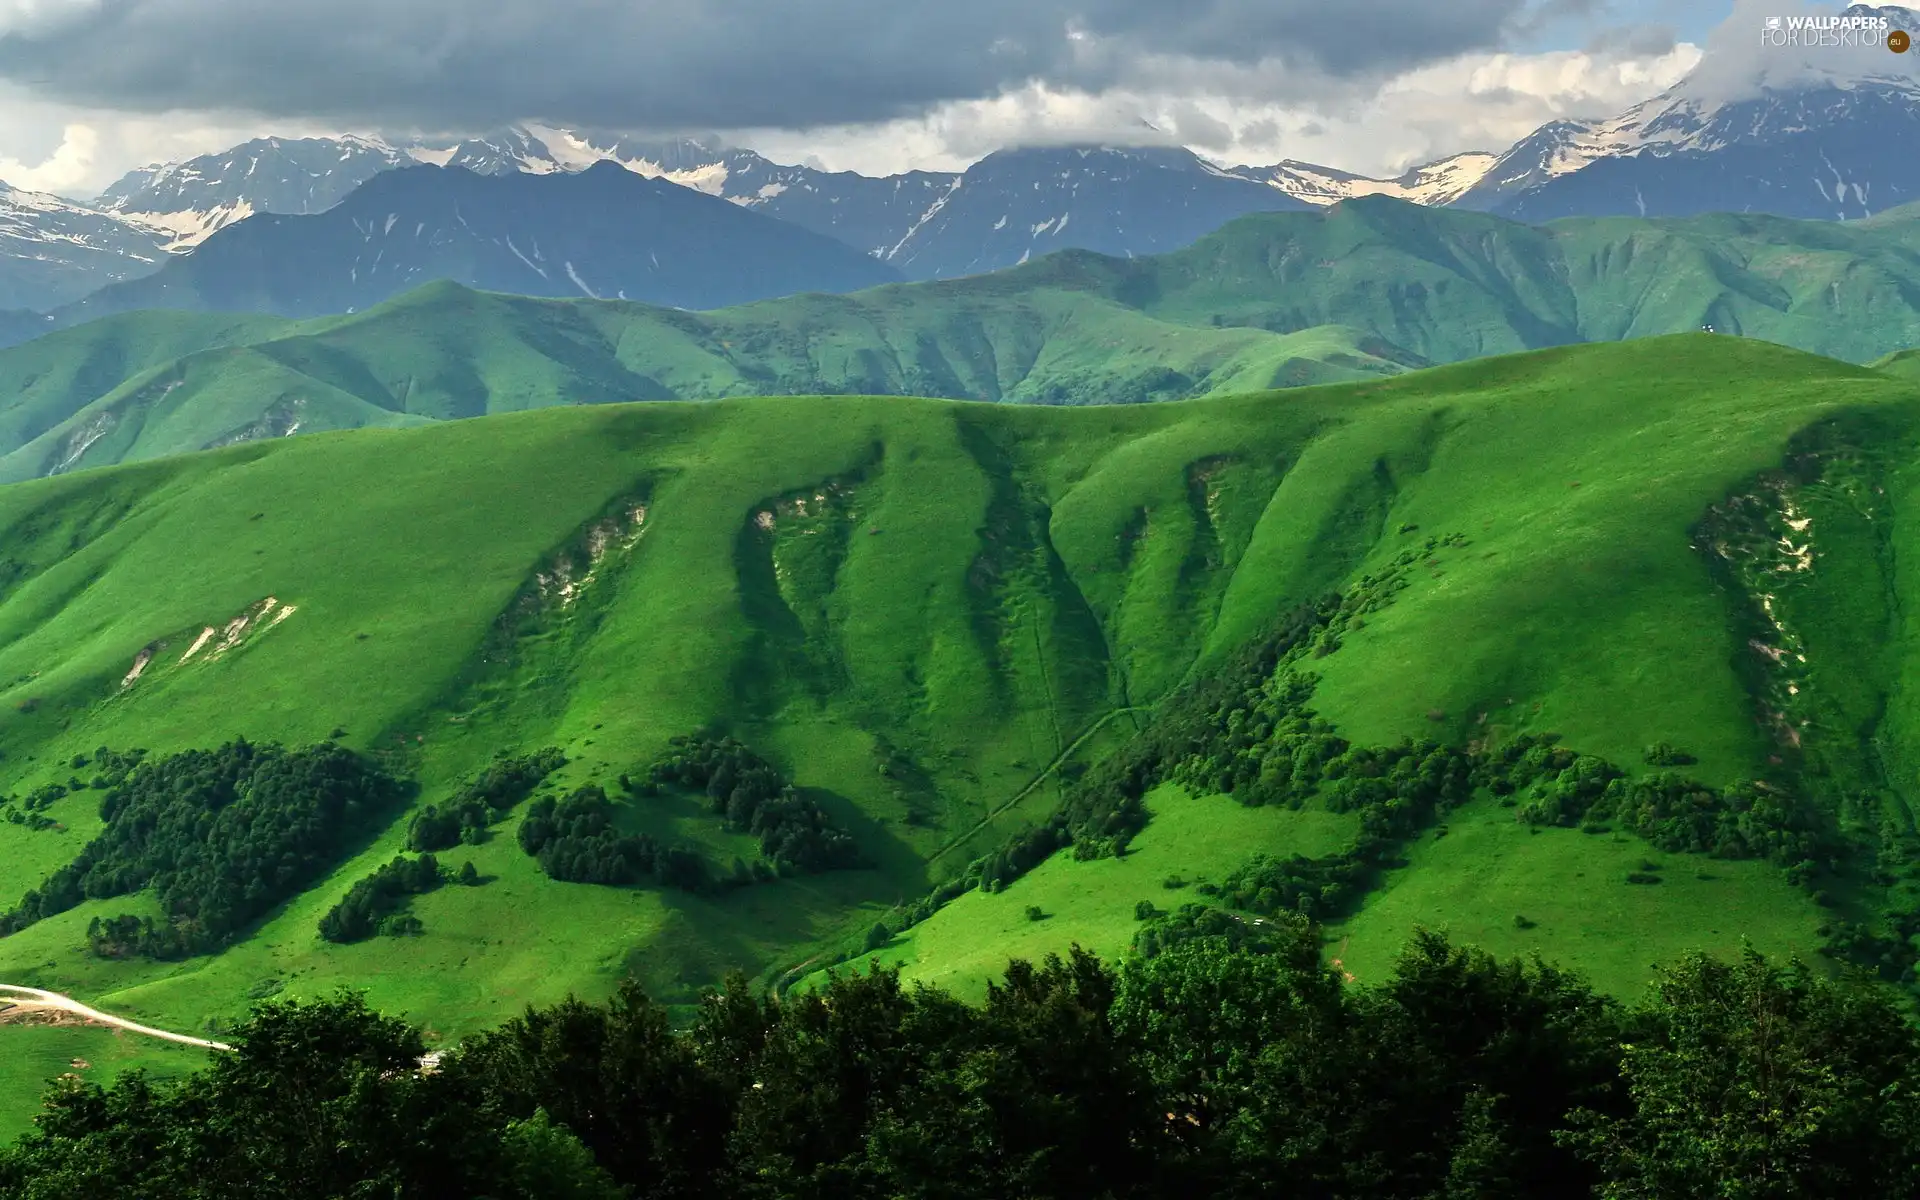 trees, viewes, green ones, The Hills, Mountains